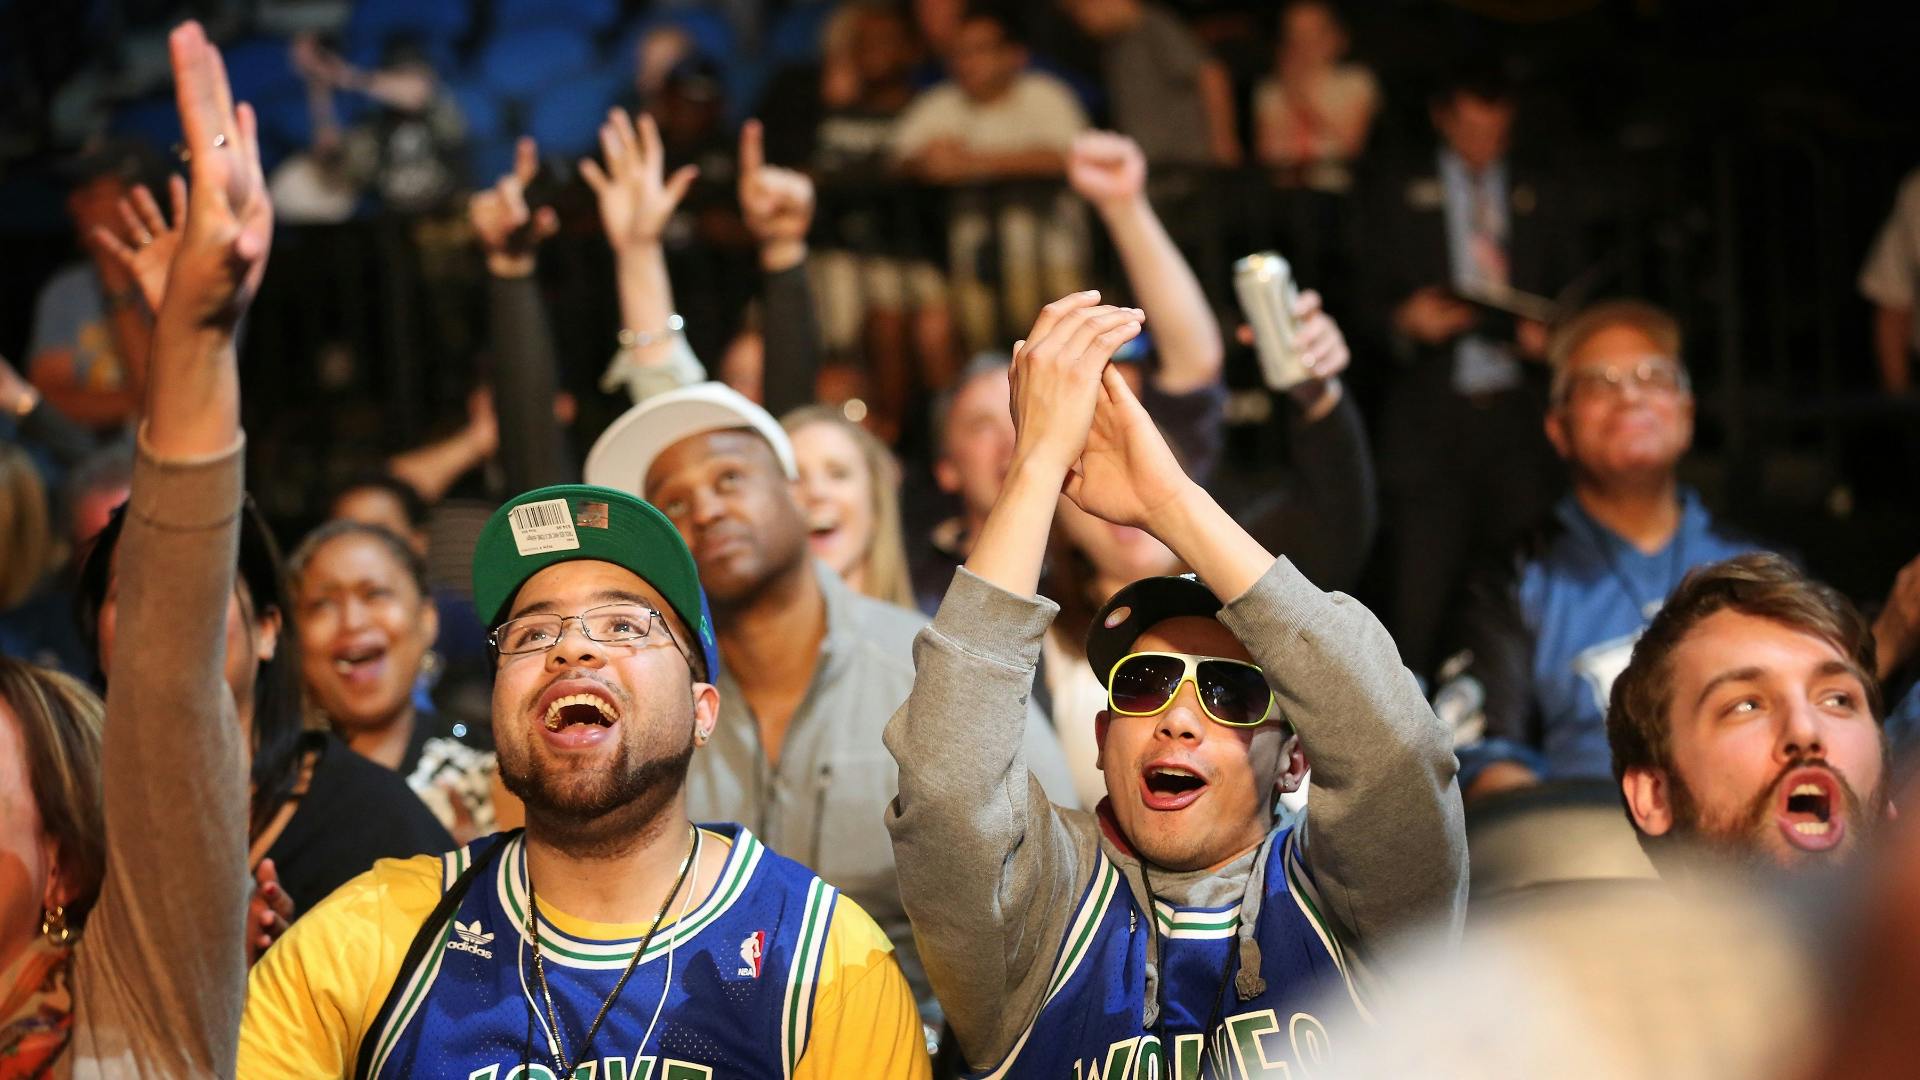 Fans went wild as the Minnesota Timberwolves won first pick in the NBA draft for the first time in franchise history.